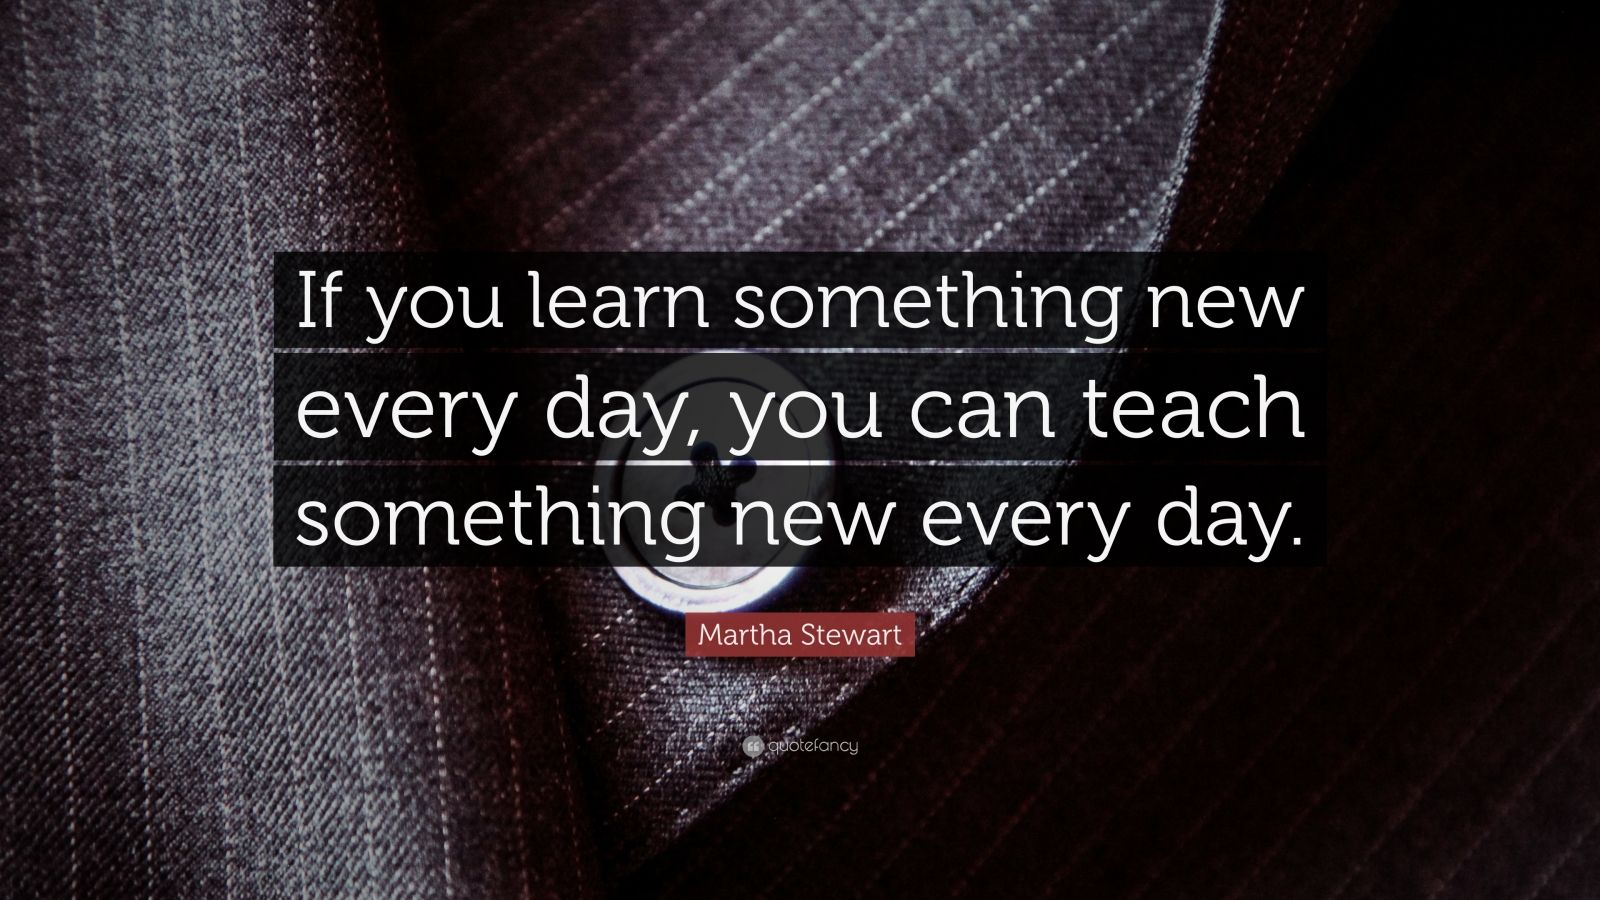 Martha Stewart Quote “if You Learn Something New Every Day You Can Teach Something New Every